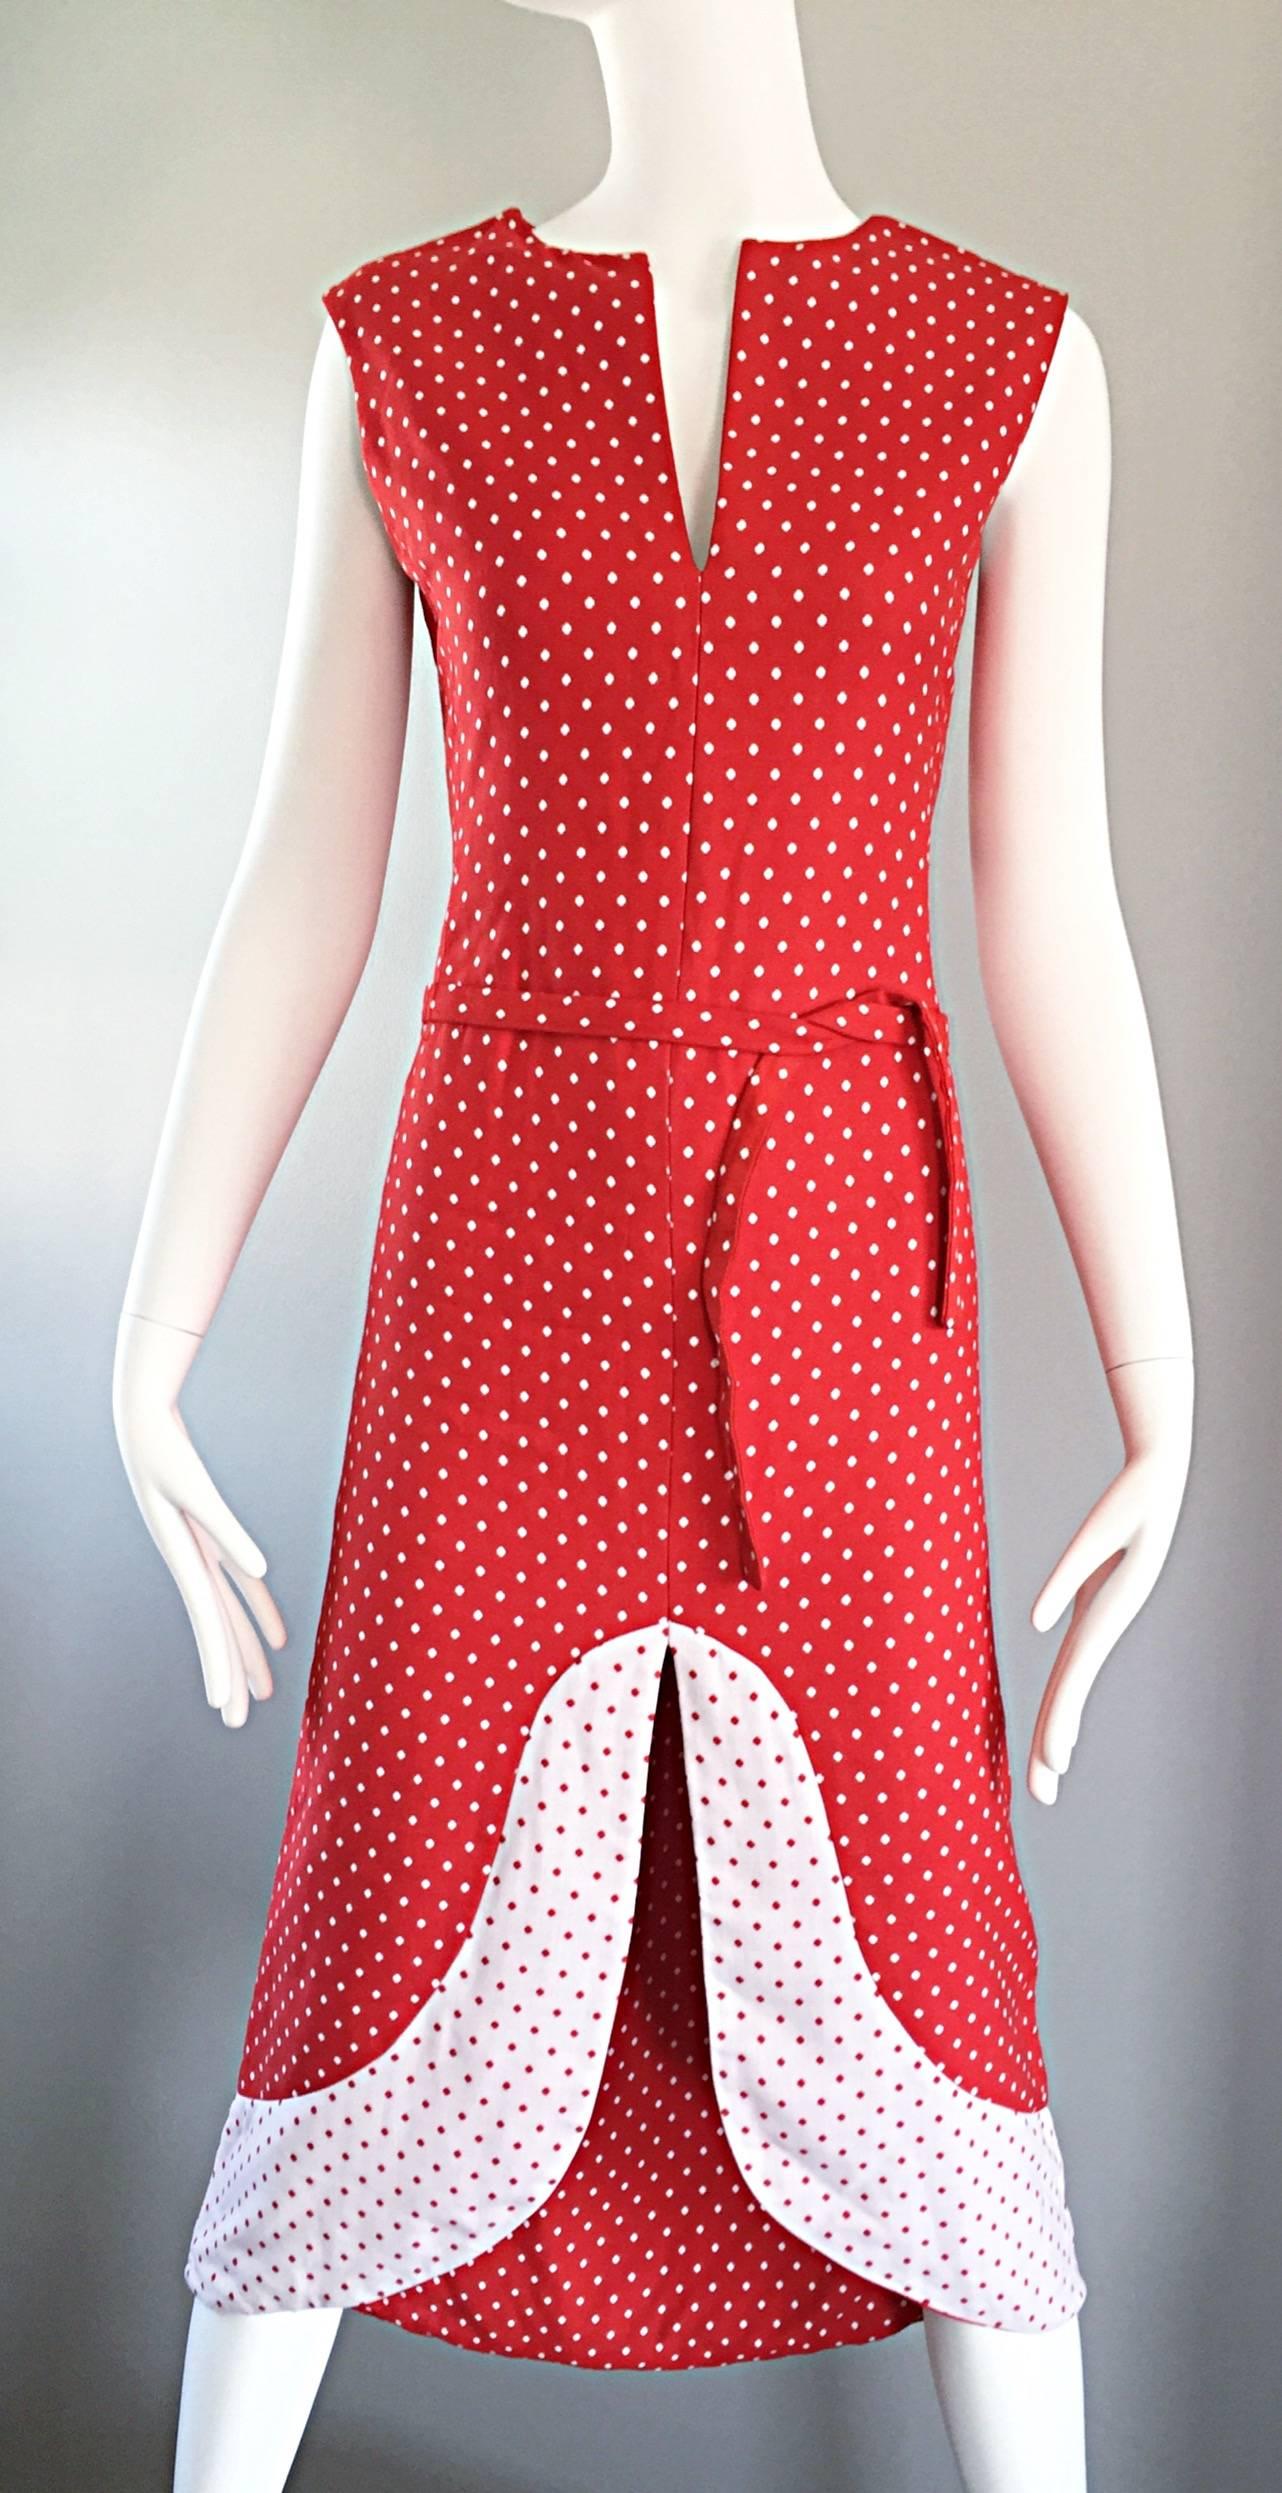 Women's 1960s Pierre Cardin Couture Vintage Space Age Red White Polka Dot Cut Out Dress For Sale